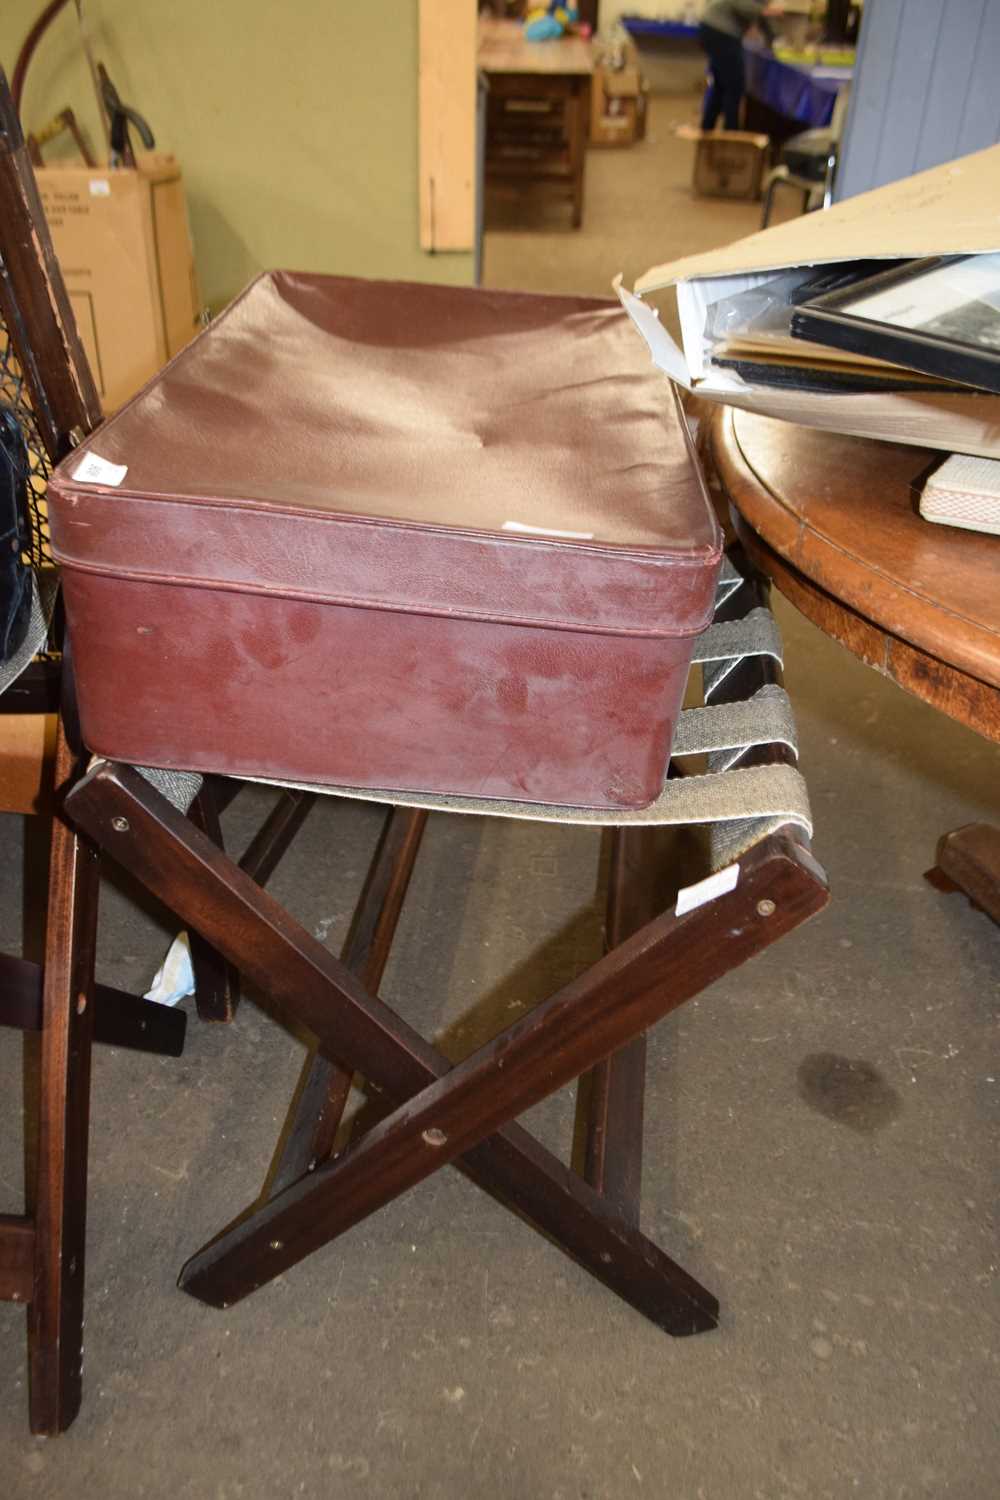 Vintage suitcase with folding wooden stand